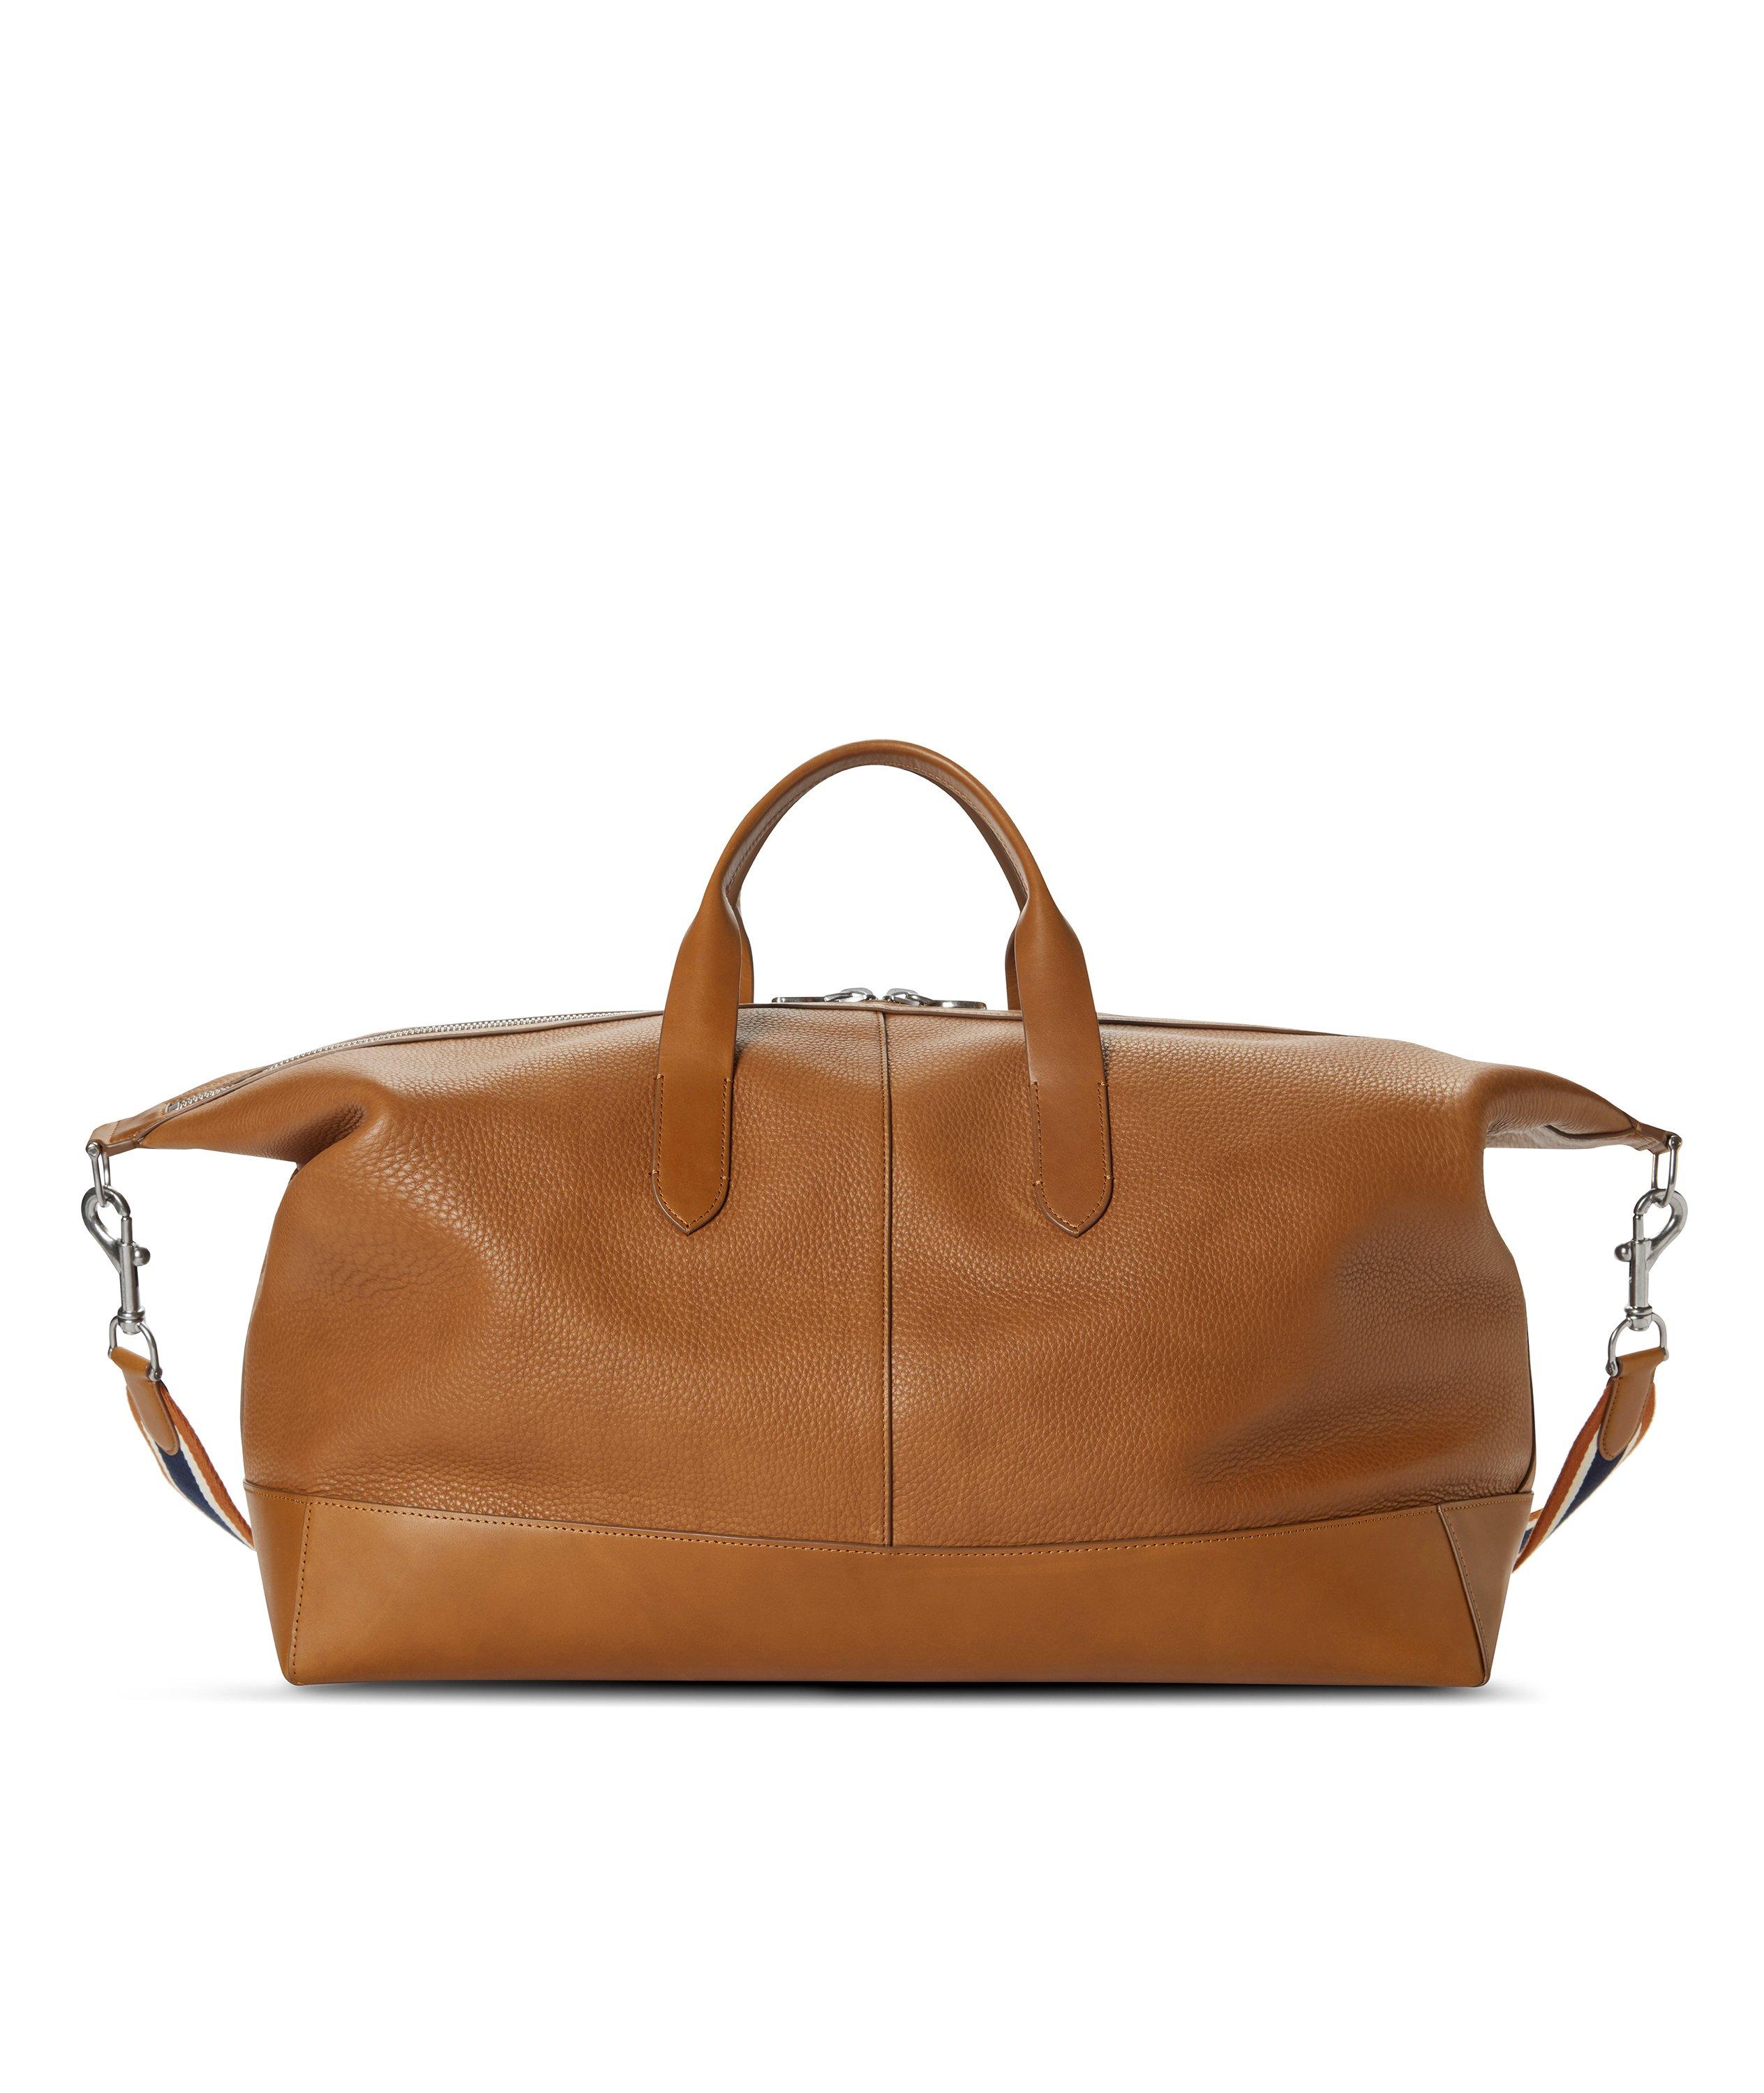 Canfield Classic Holdall Duffle Bag  image 2